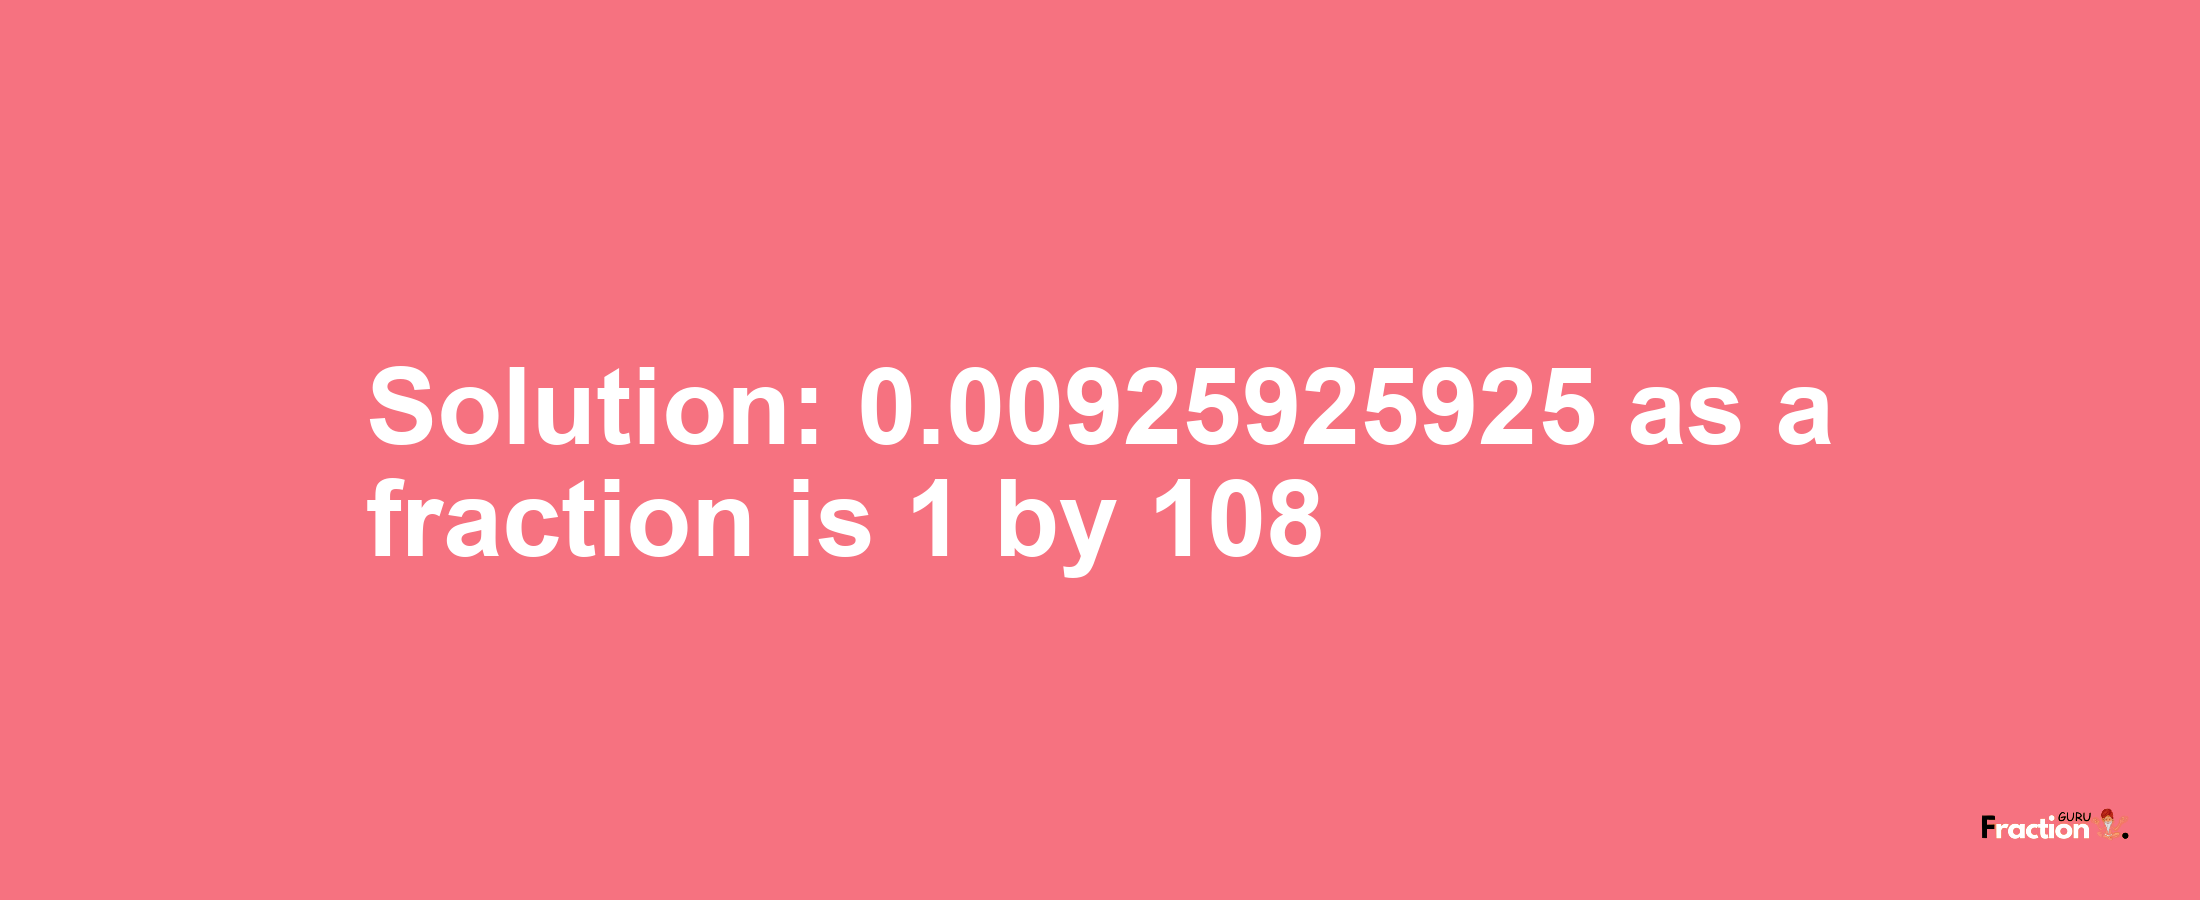 Solution:0.00925925925 as a fraction is 1/108